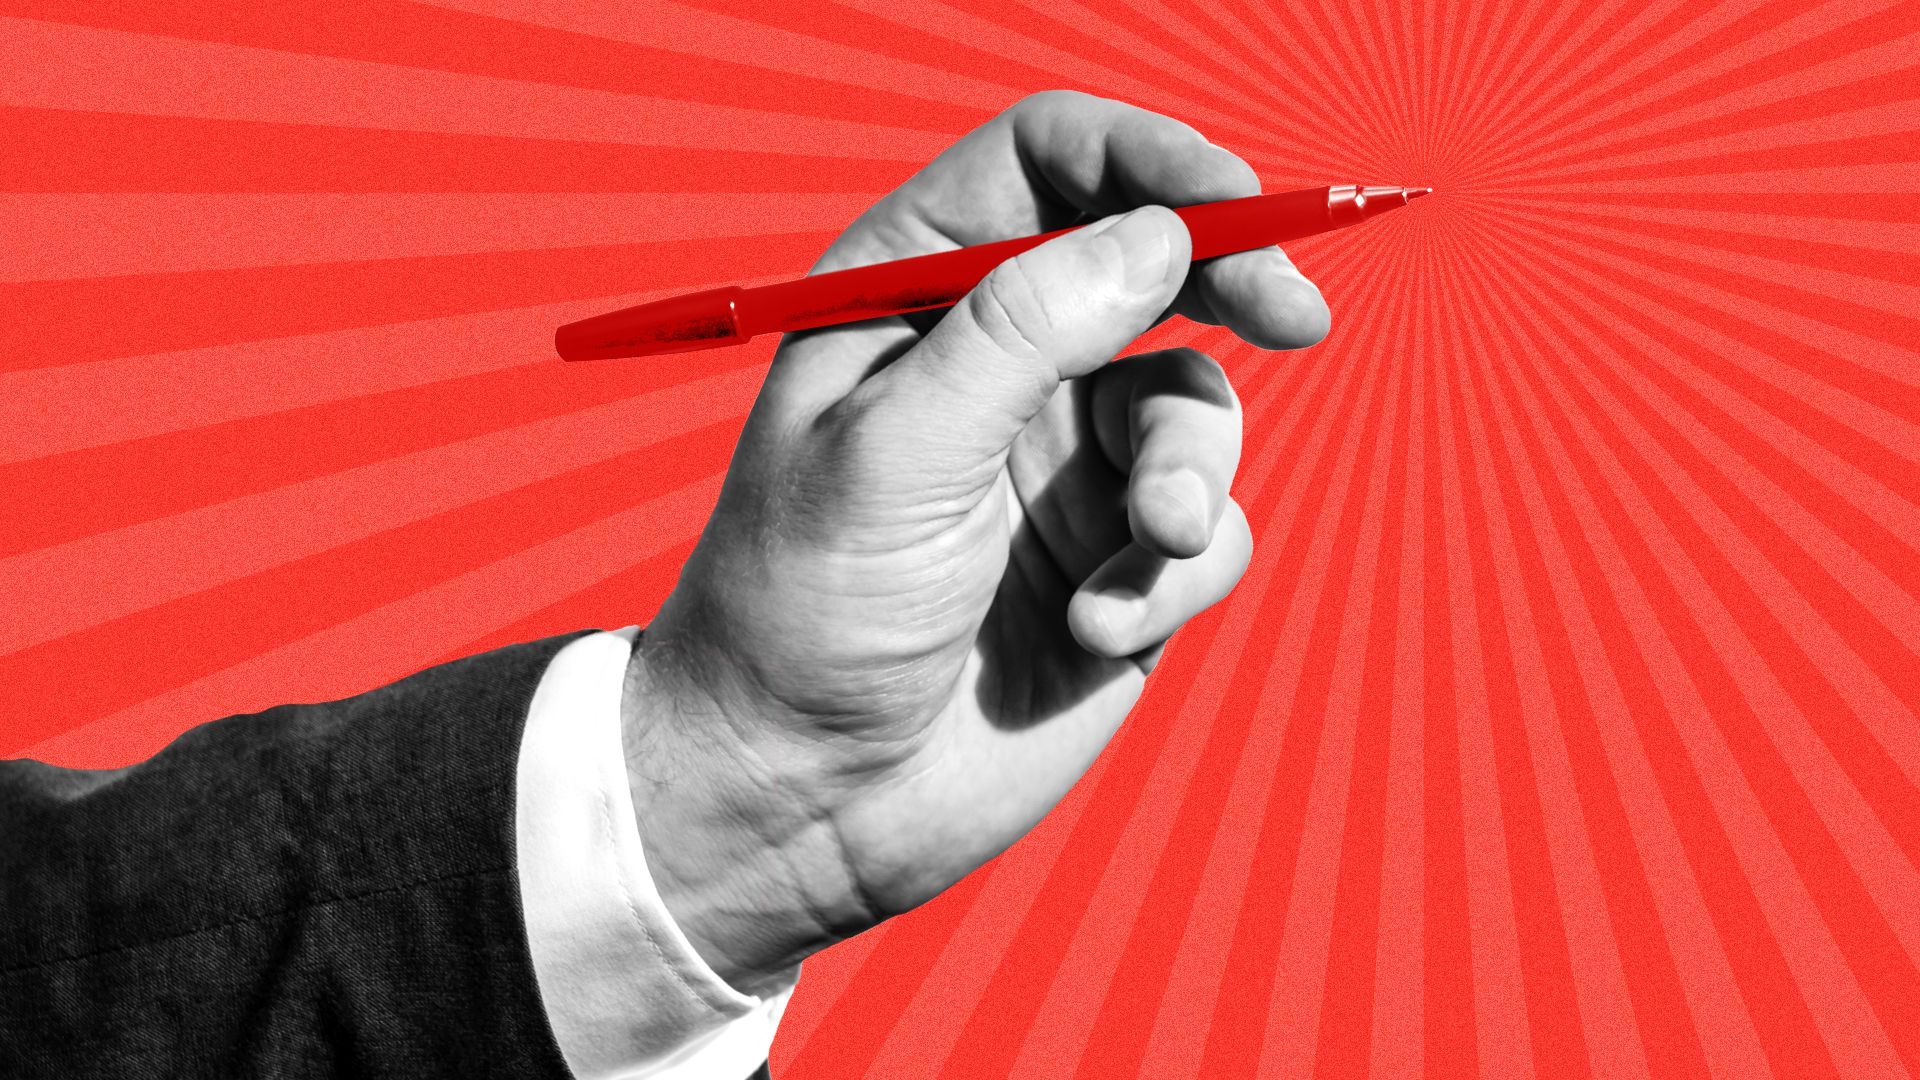 Illustration of a hand in a suit wielding a red pen with action lines surrounding it in the background